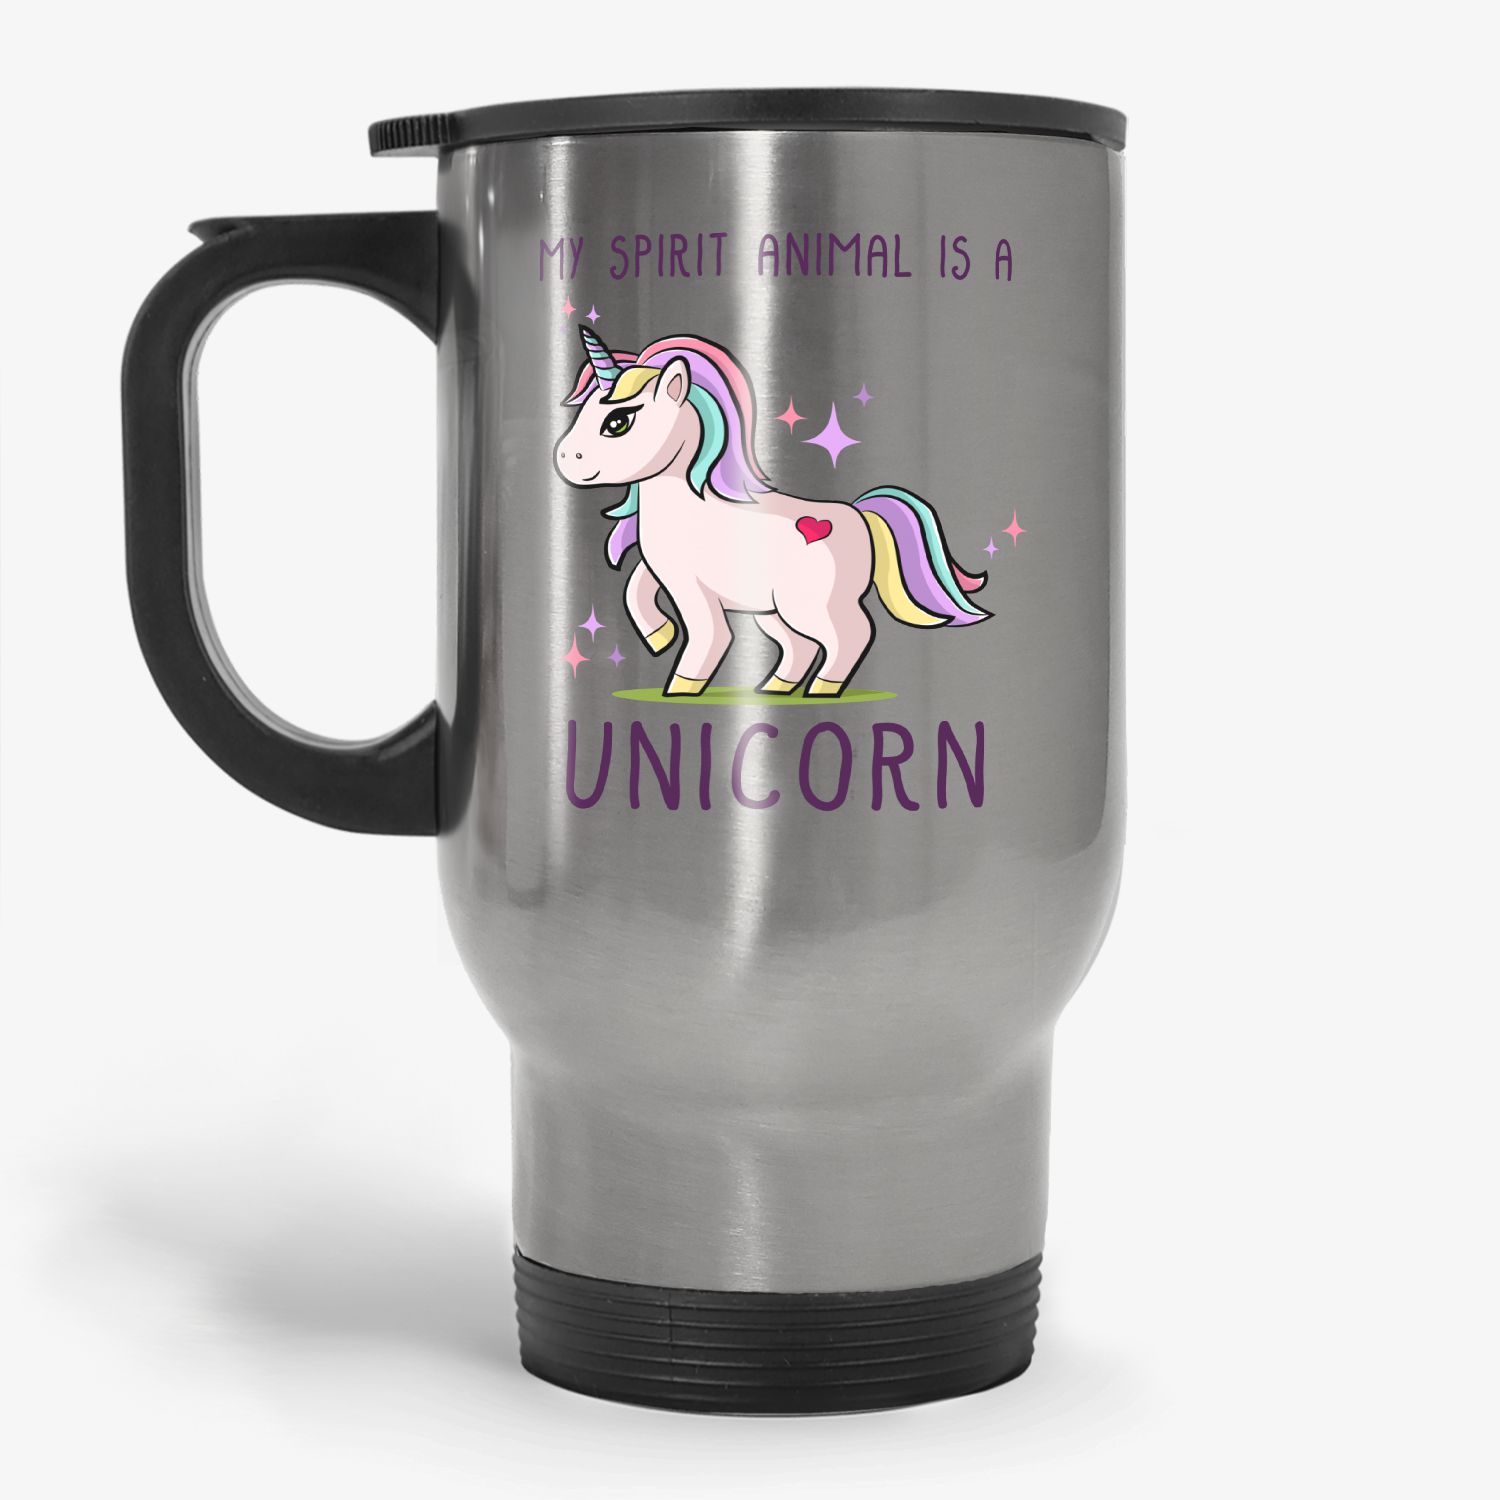 My Spirit Animal Is A Unicorn, cute funny coffee travel mug, birthday gift  for her, gift for daughter, gift for sister, travel mug for unicorn lover